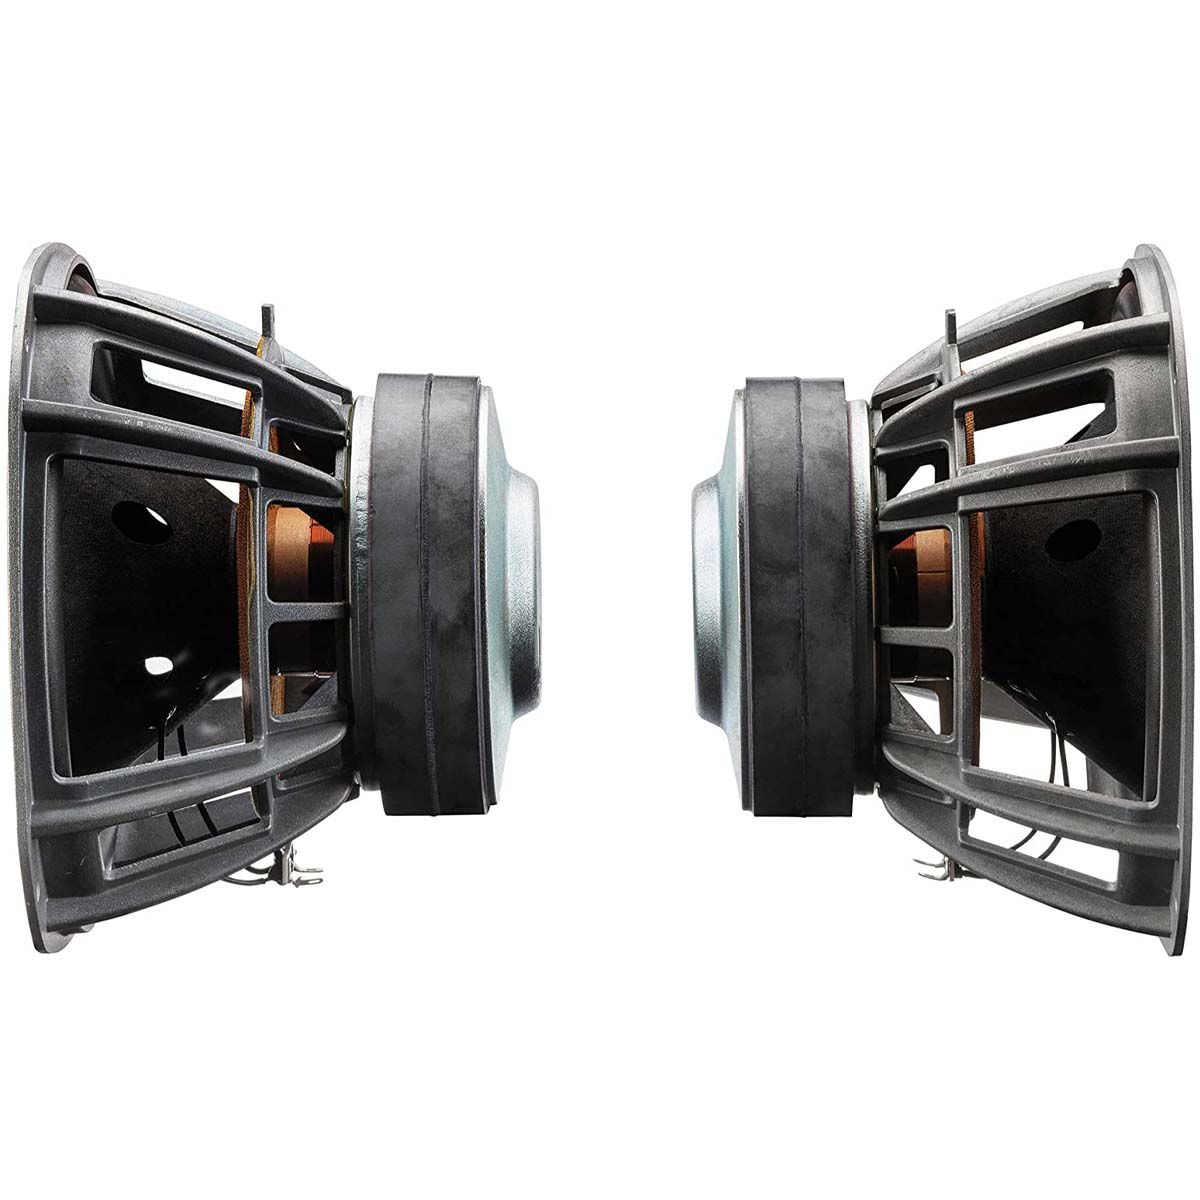 KEF KF92 1000W Dual 9 Inch Force Canceling with iBX - Gloss Black - Each - force canceling drivers